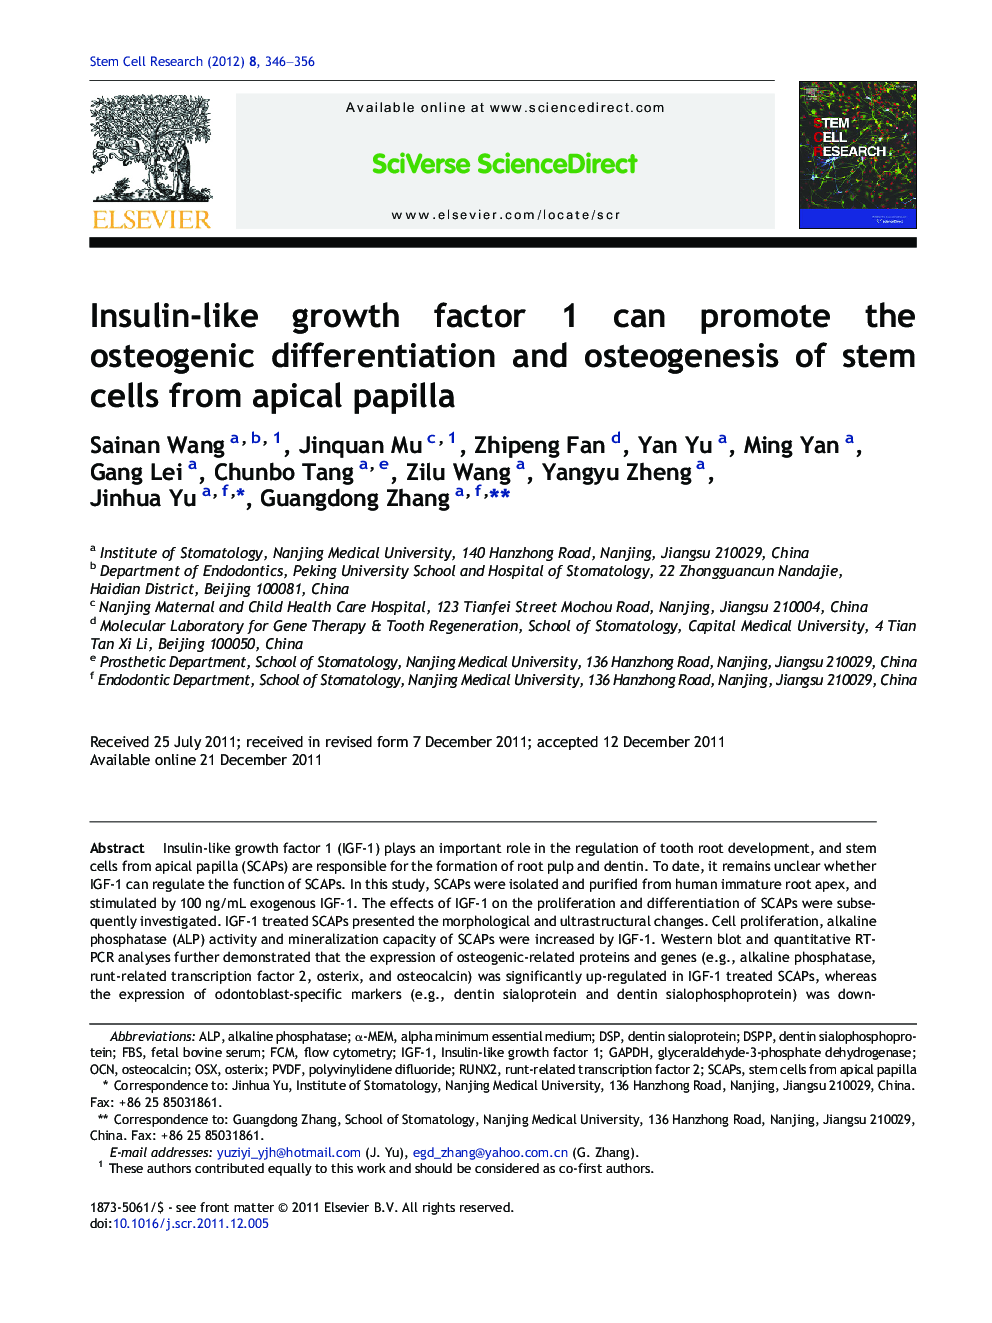 Insulin-like growth factor 1 can promote the osteogenic differentiation and osteogenesis of stem cells from apical papilla